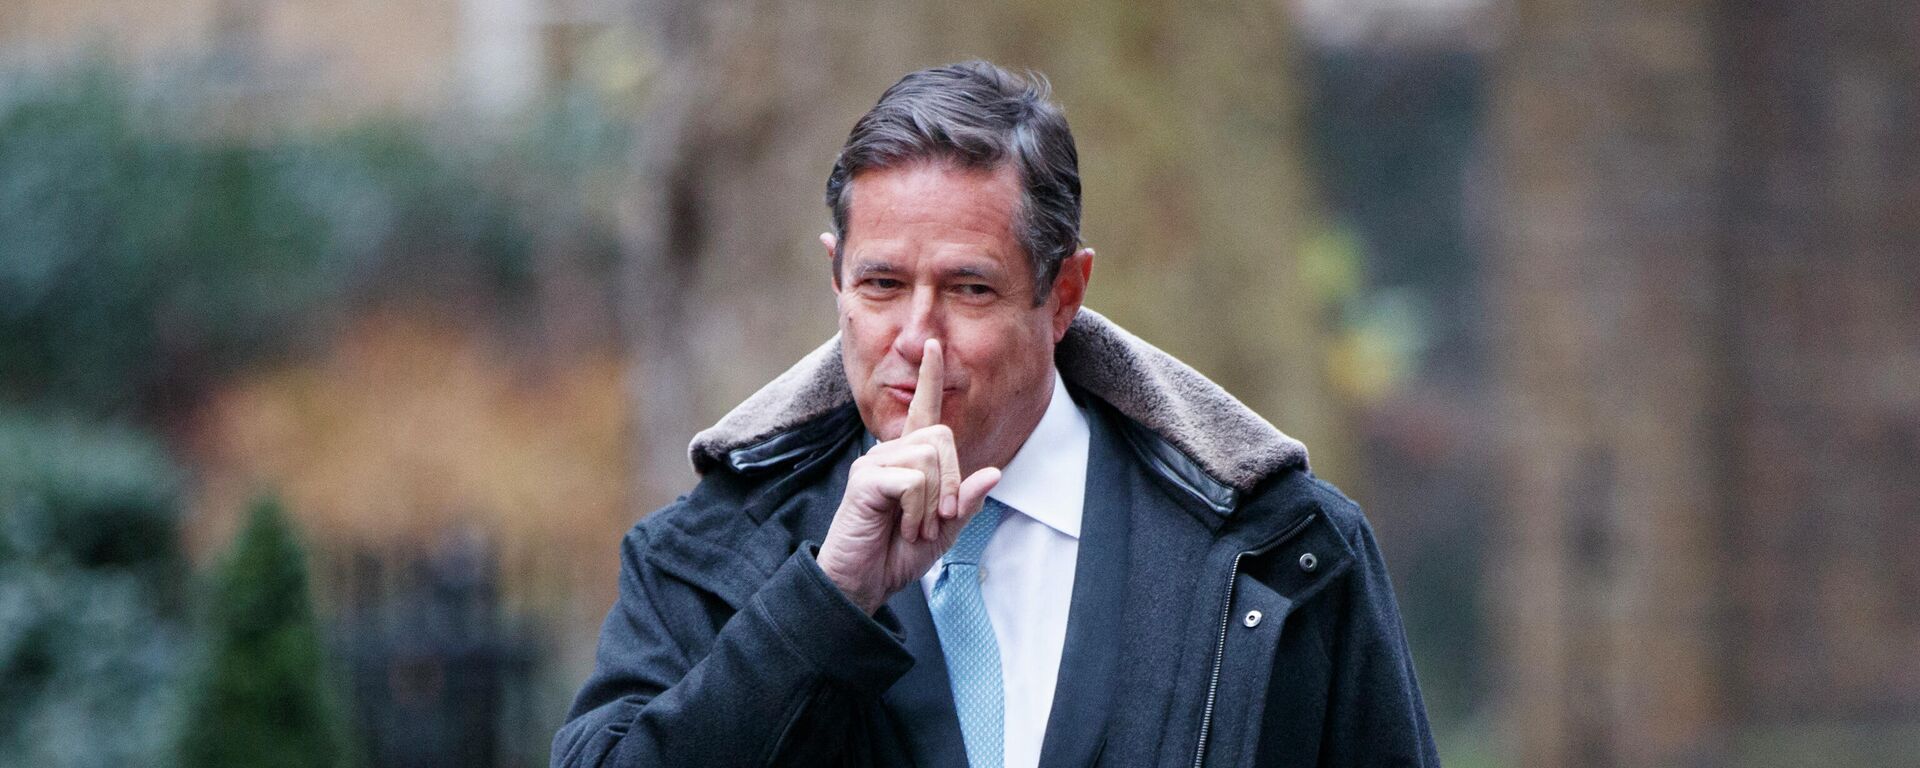 Jes Staley, CEO Barclays, arrives at Downing Street for a meeting in London on January 11, 2018. - Sputnik International, 1920, 14.11.2021